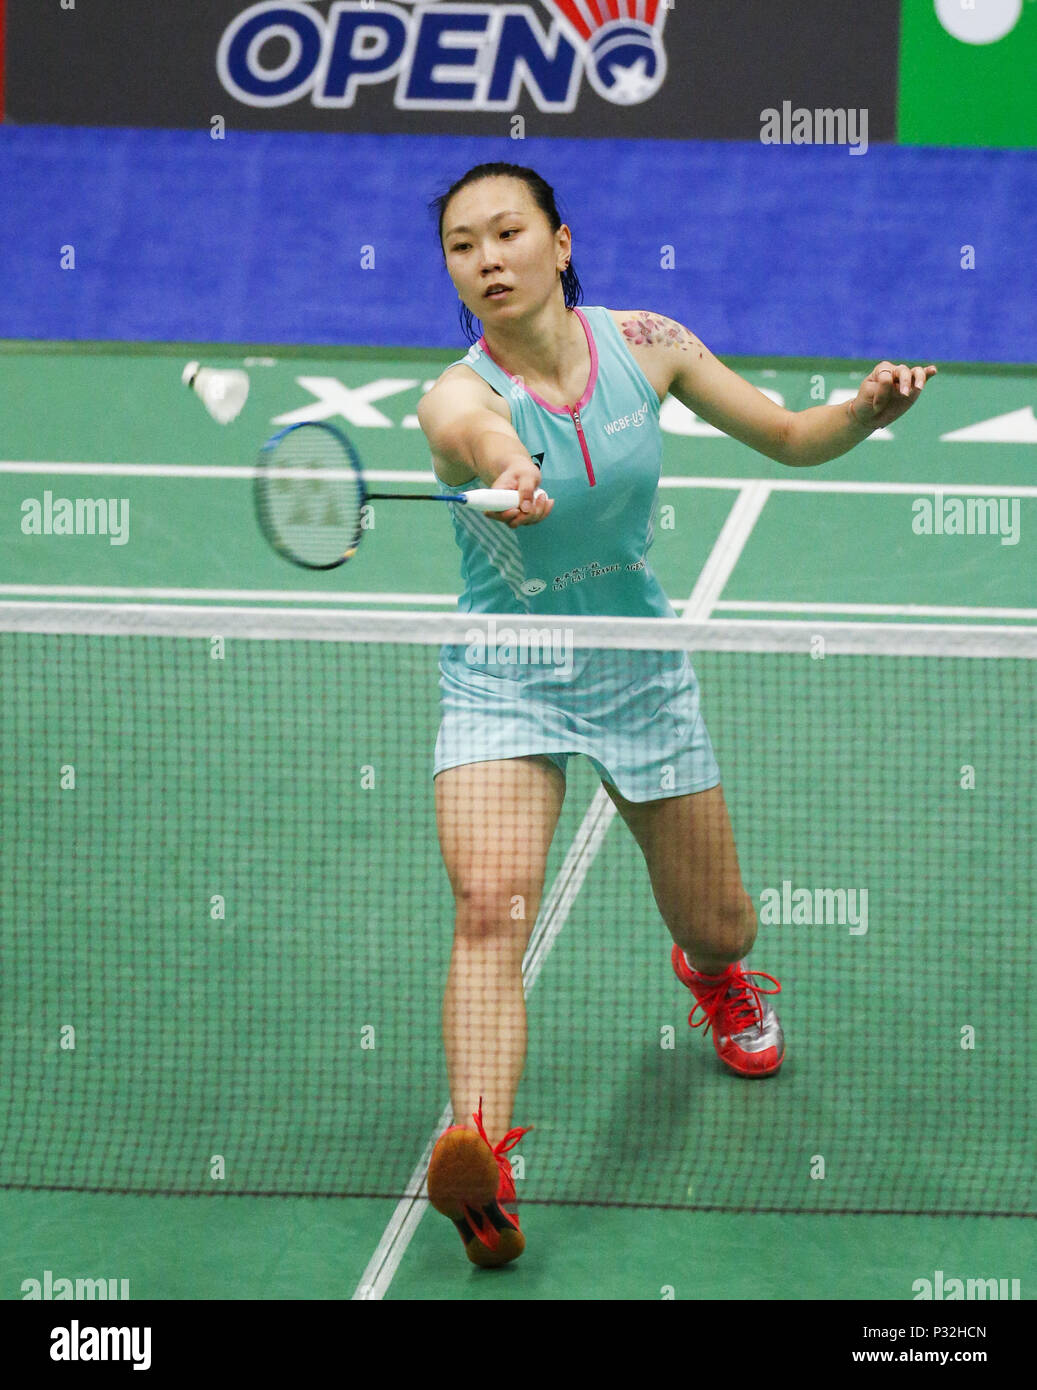 June 16, 2018 - Los Angeles, California, U.S - Beiwen Zhang of USA,  competes against Aya Ohori of Japan, during the women's singles semi final  match at the U.S. Open Badminton Championships